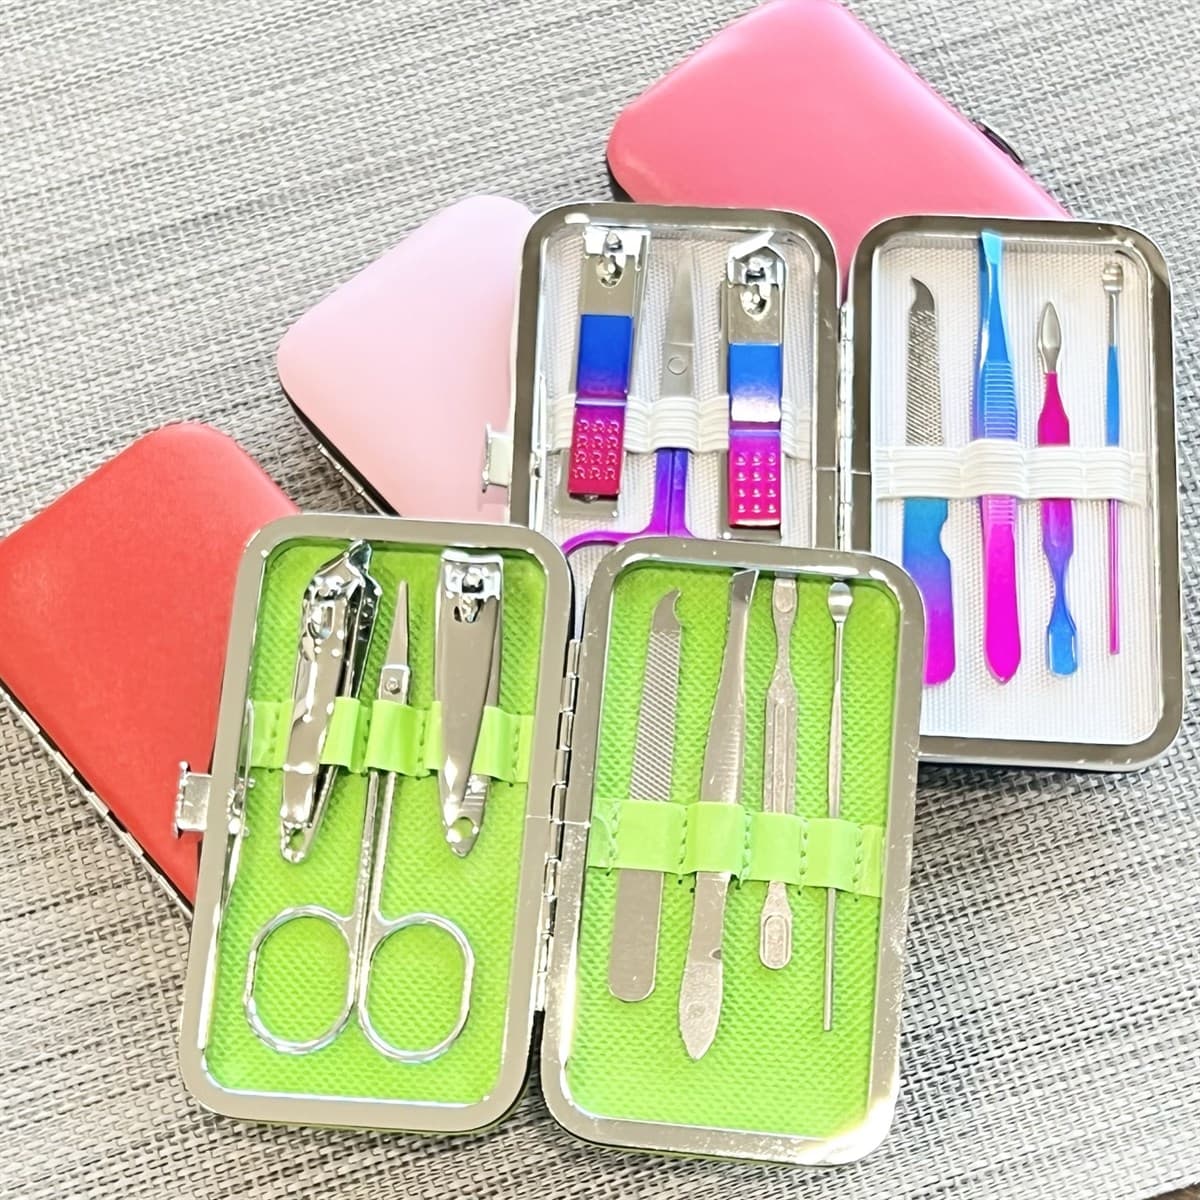 Stainless Steel Beauty Manicure Nail Kit